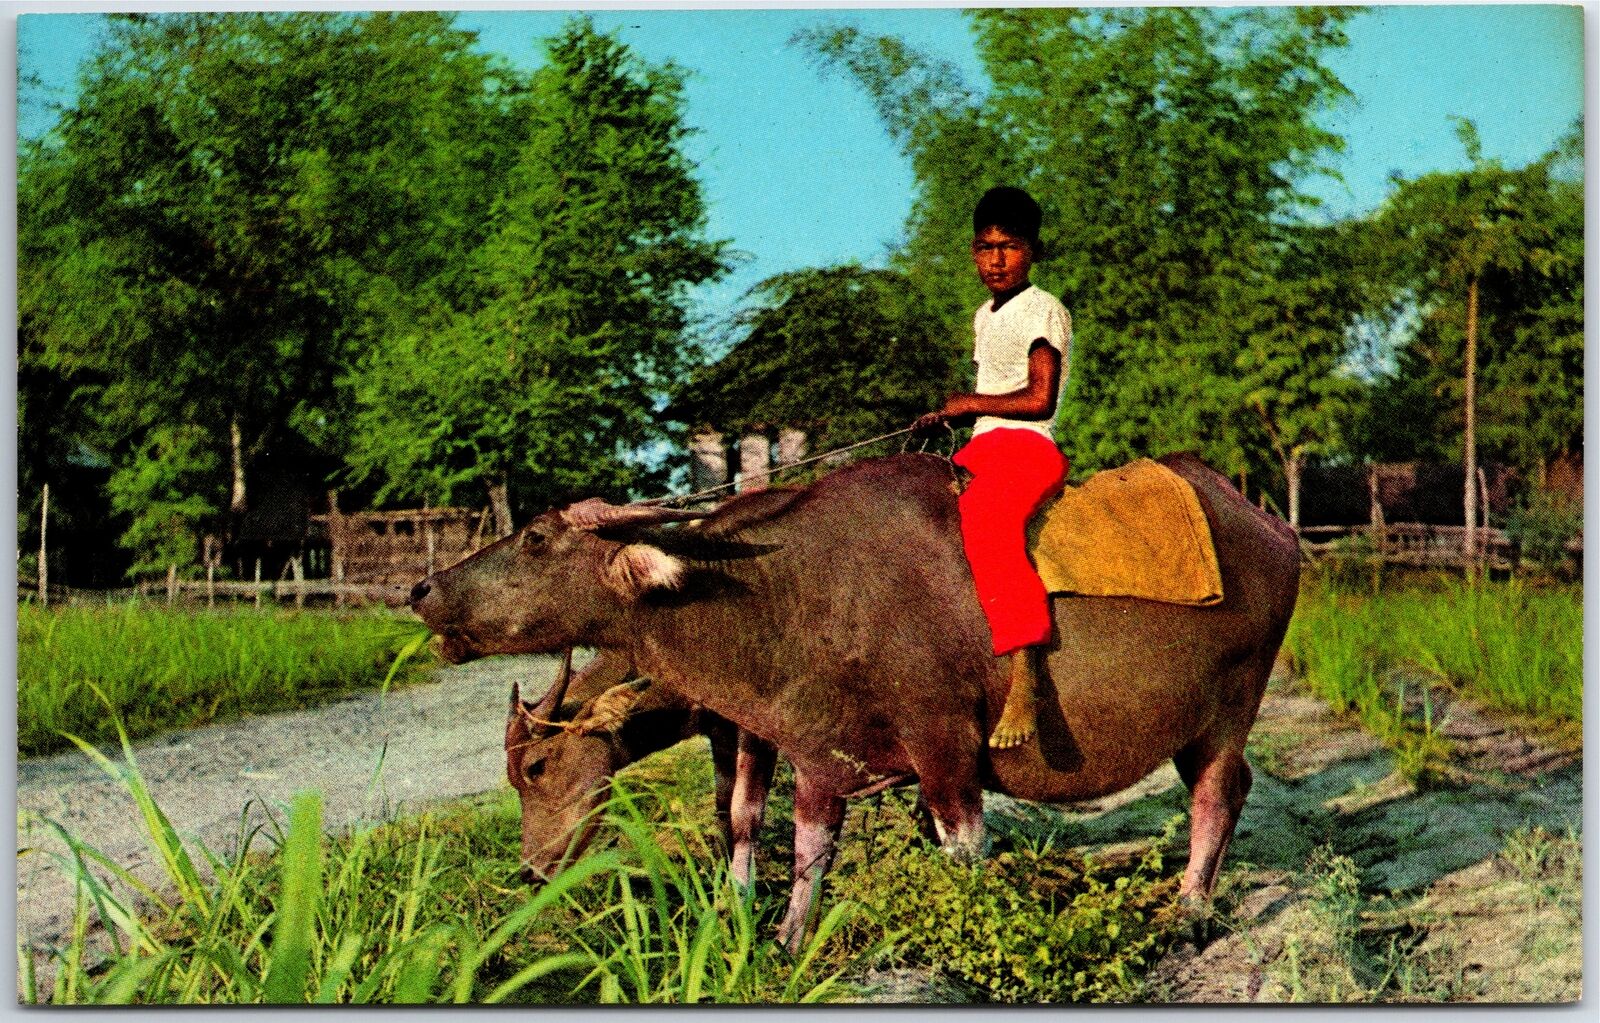 VINTAGE POSTCARD PASTURING THE CARABAO IN A PHILLIPINE BARRIO SCENE c. 1960s